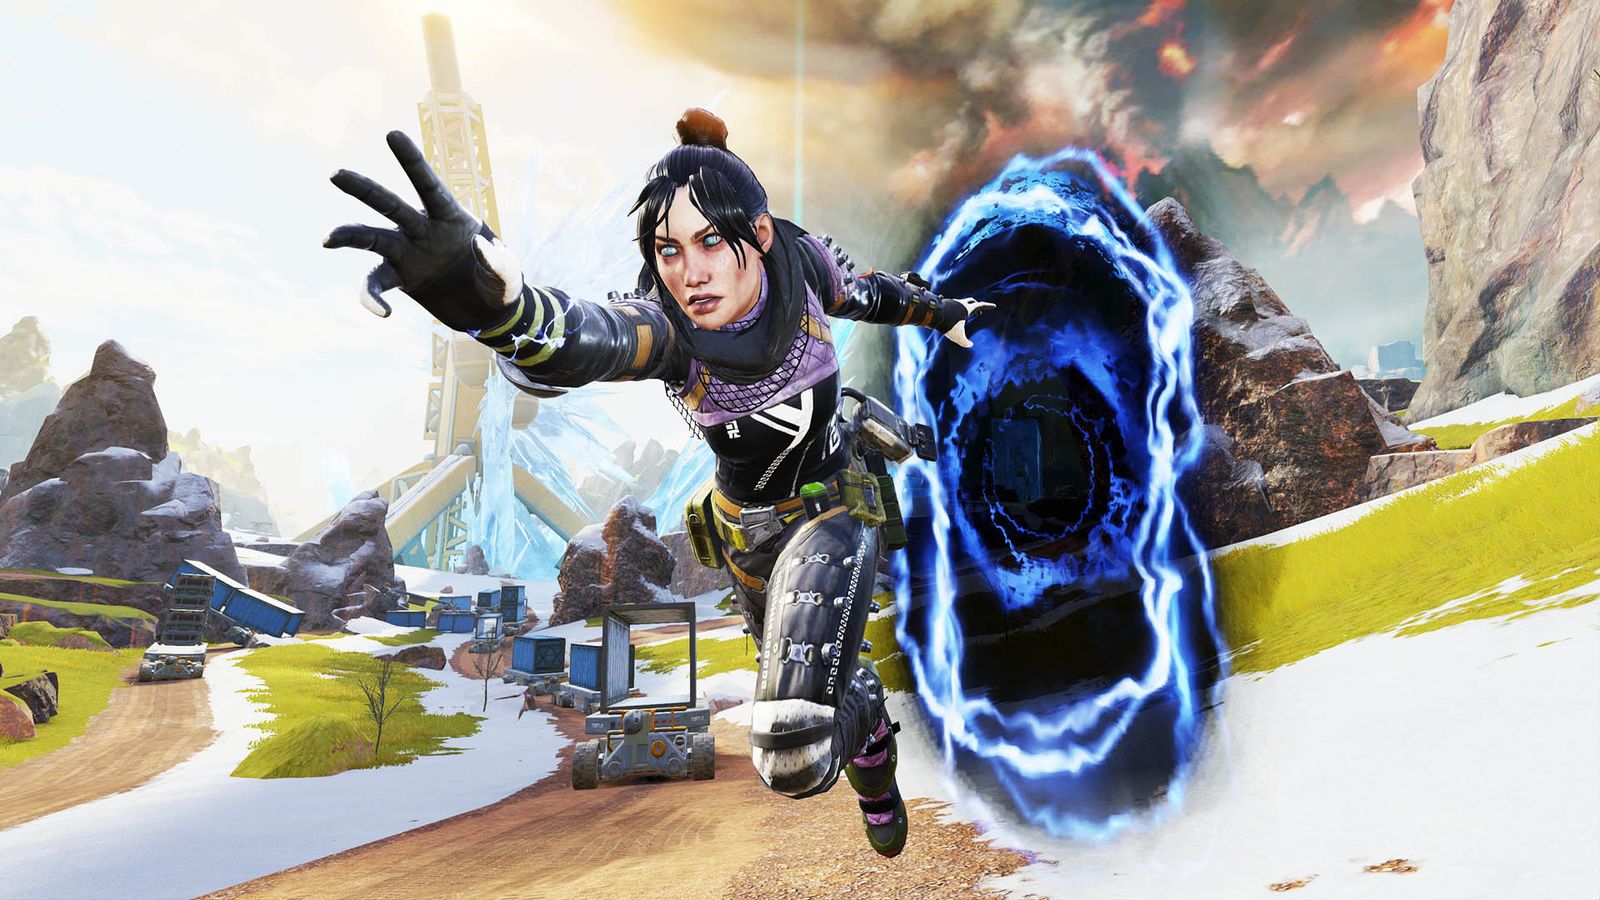 Apex Legends character moving out of portal in background